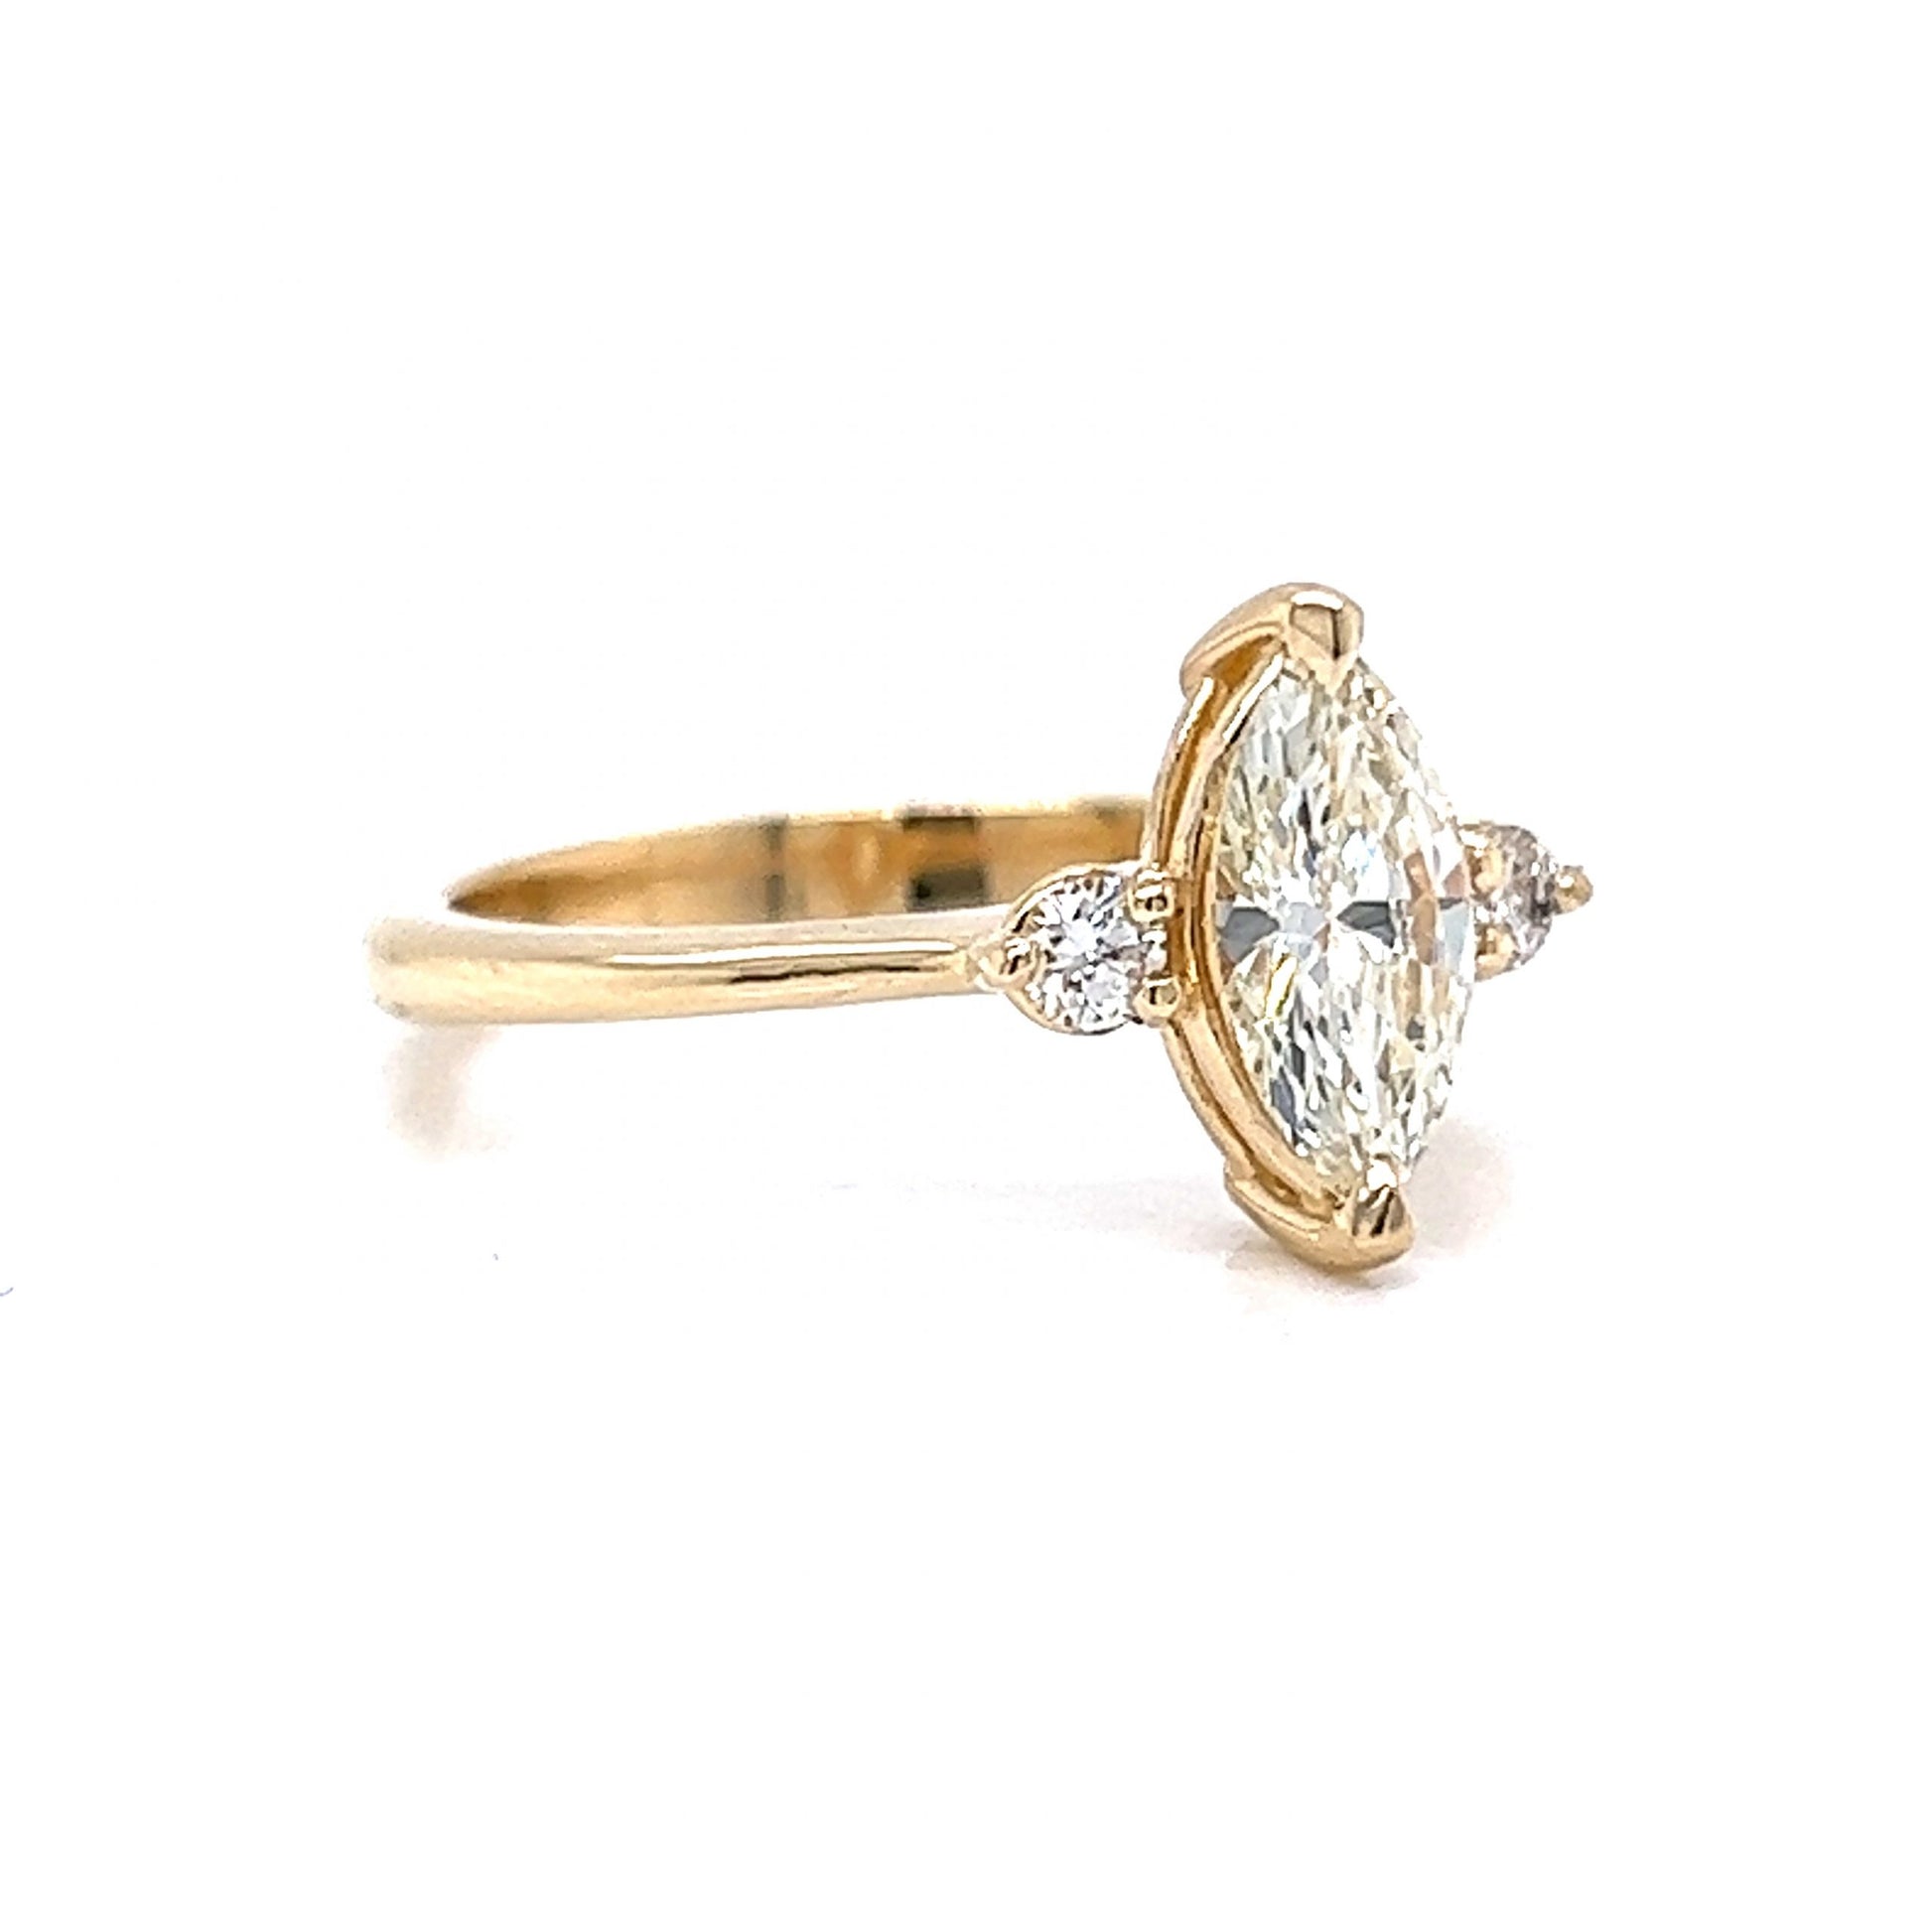 .68 Marquise Cut Diamond Engagement Ring in 14k Yellow Gold